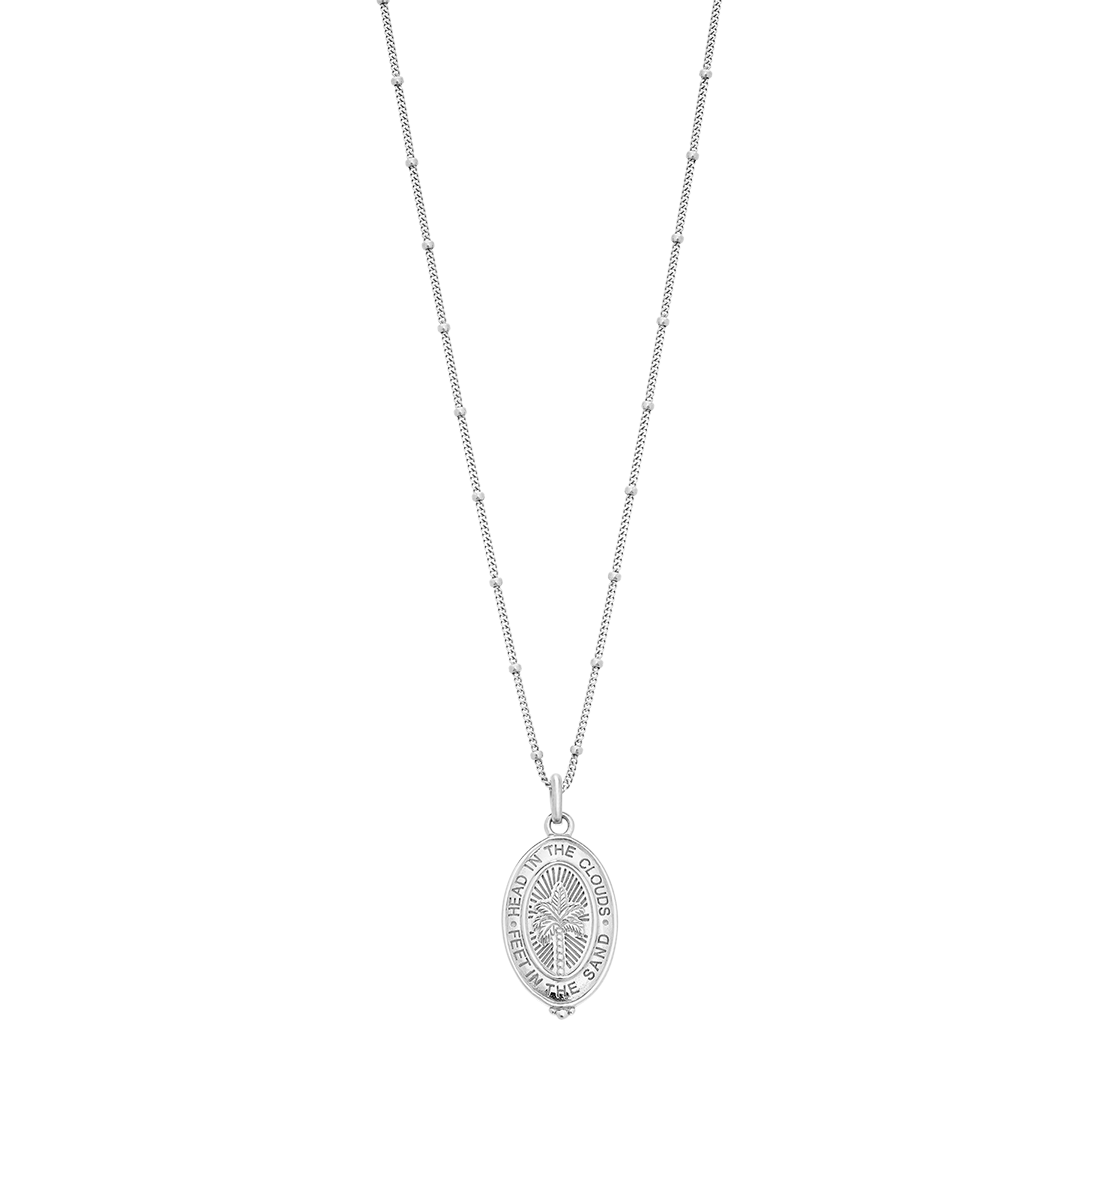 PALM COIN NECKLACE (STERLING SILVER) - IMAGE 1